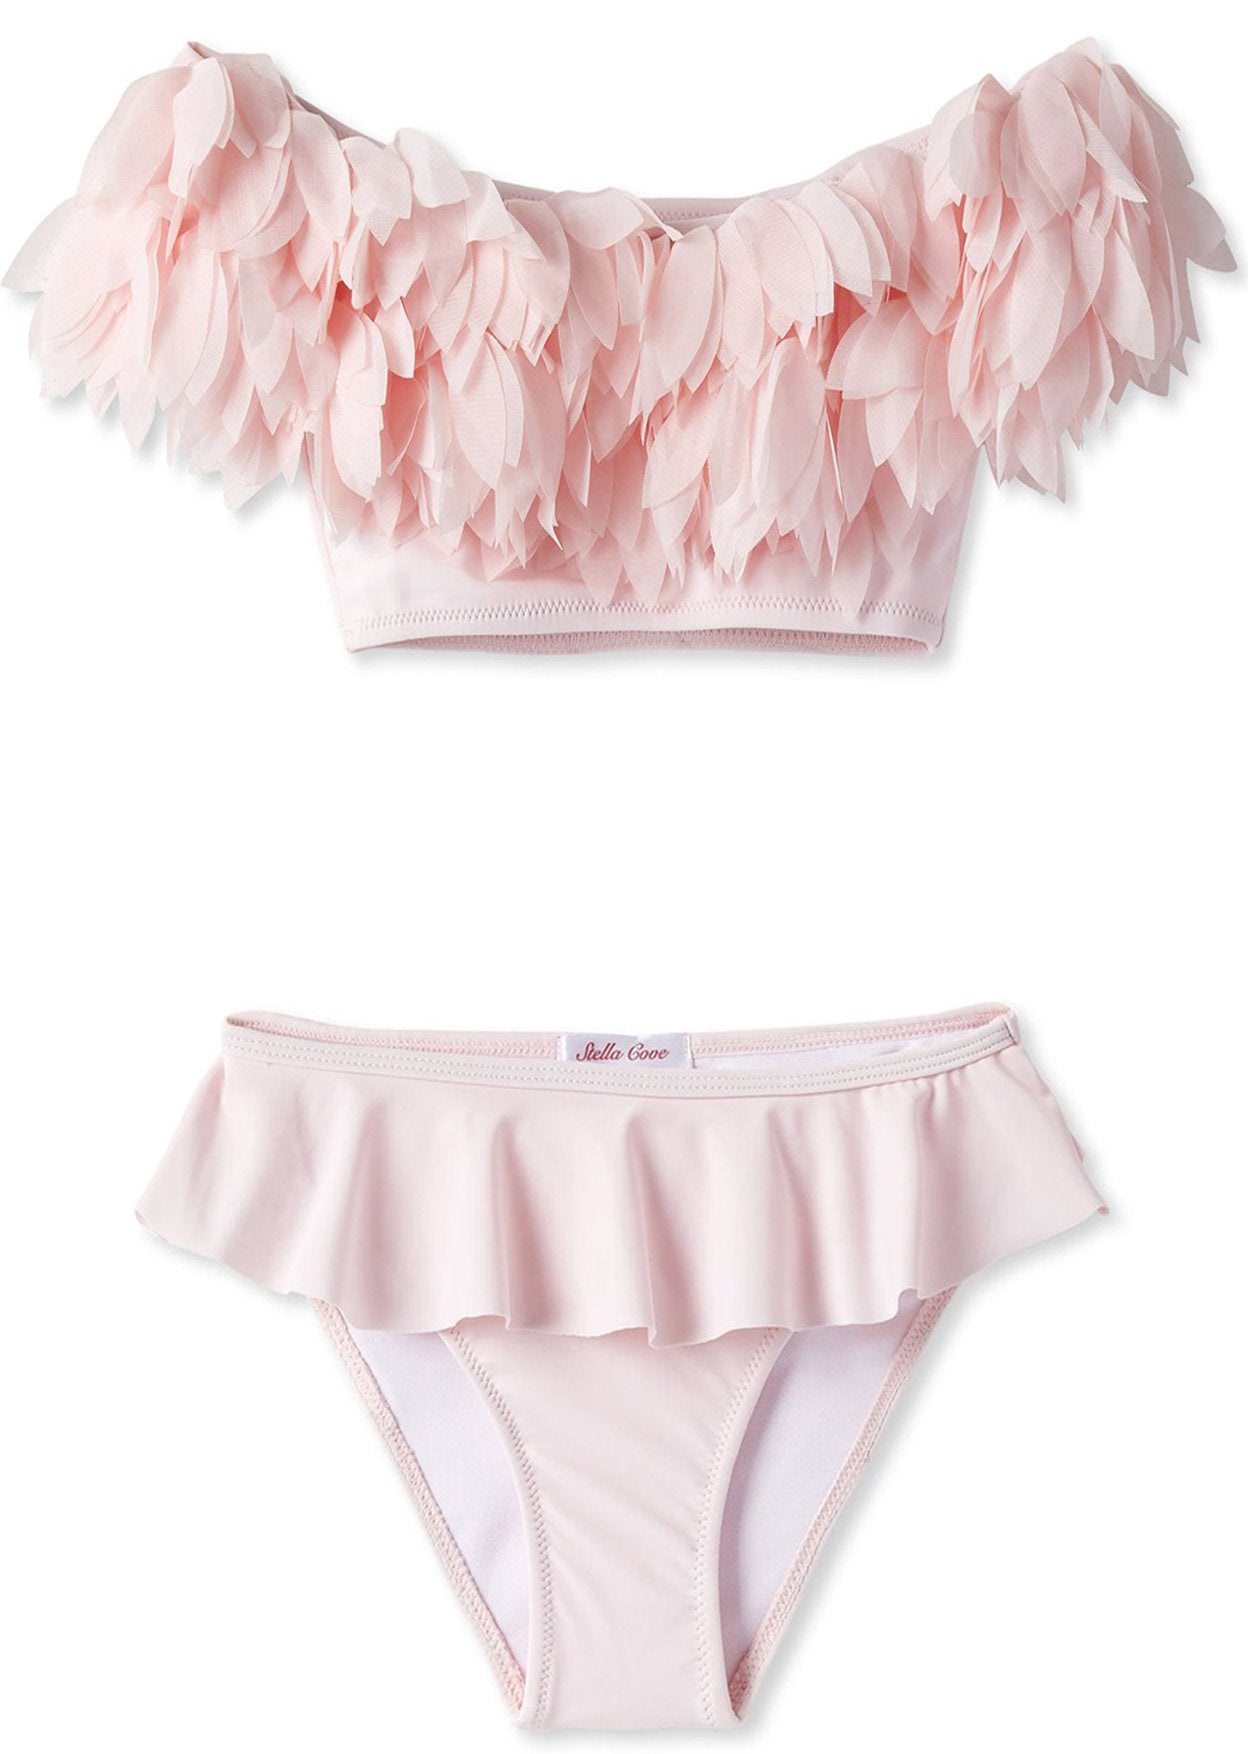 Ruffle Your Feathers Swimsuit, Hot Pink